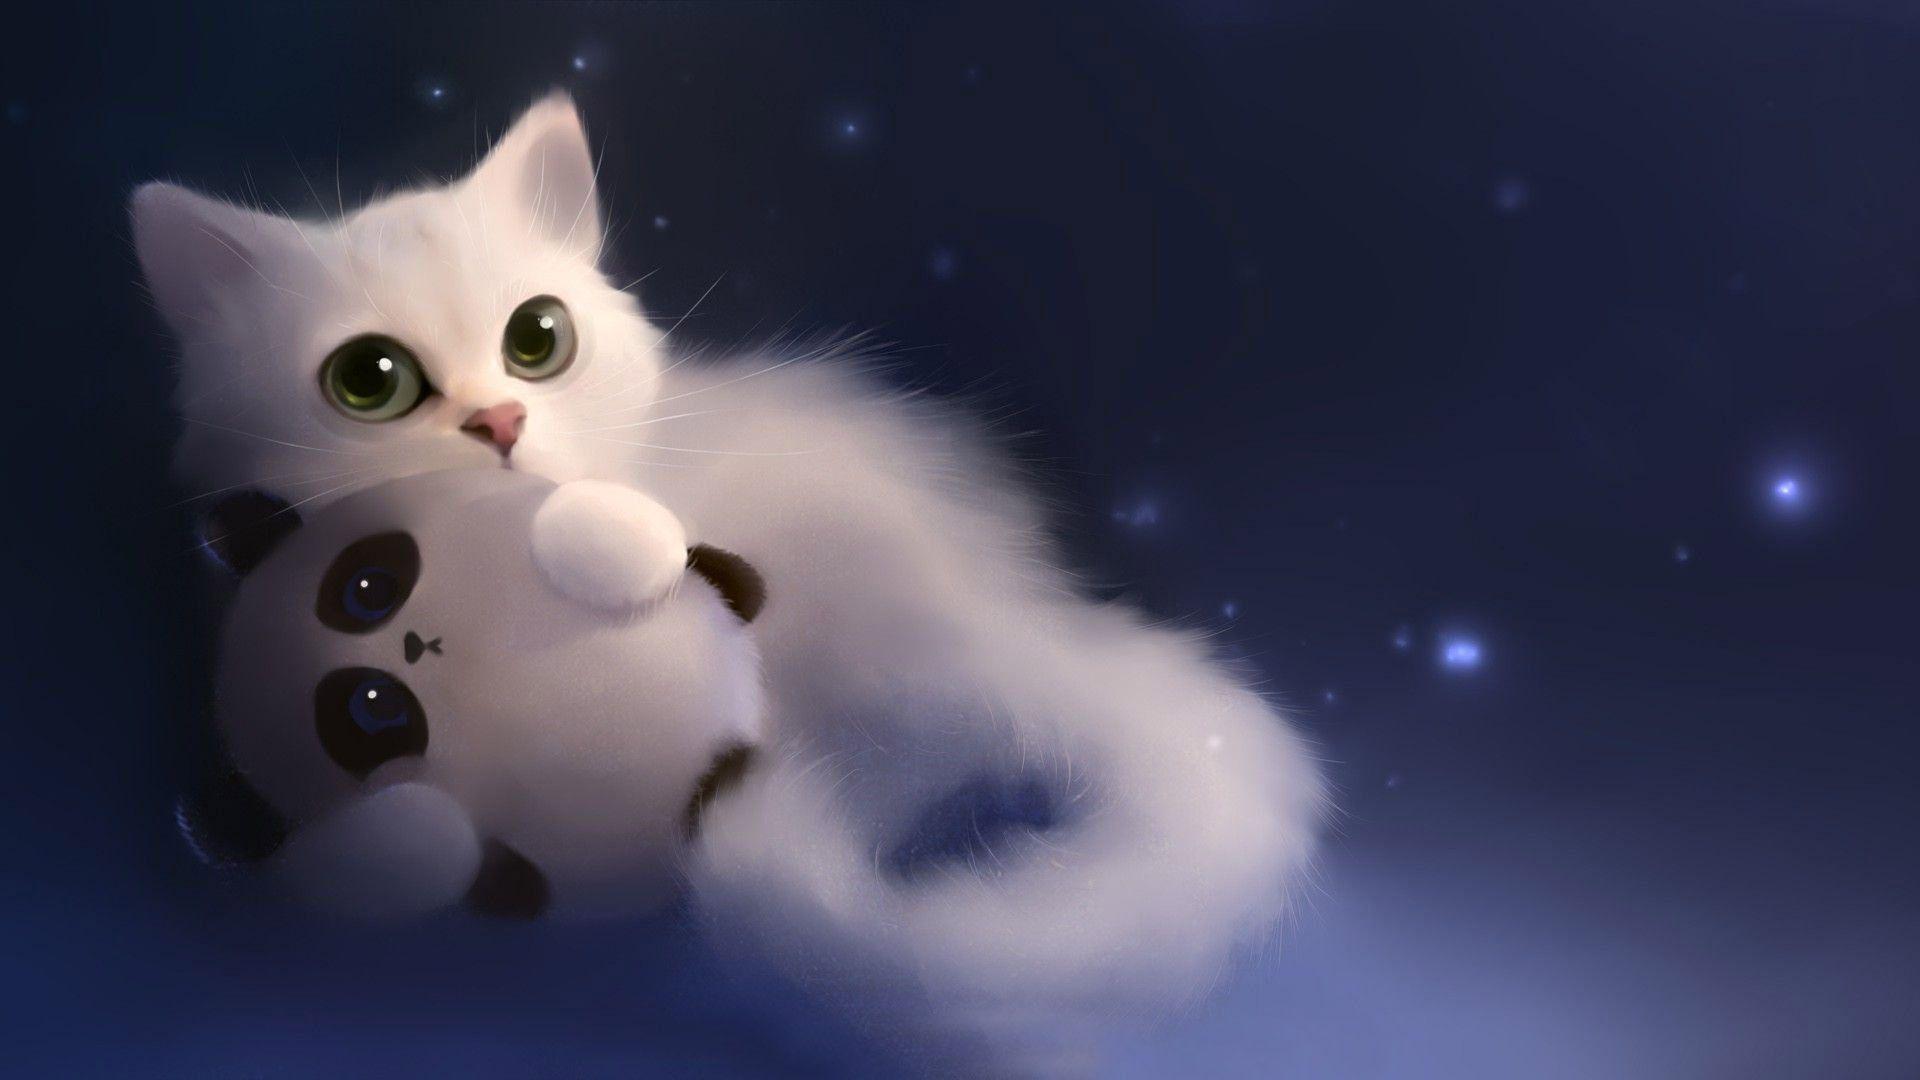 Cute Anime Pets Wallpaper : Anime Animals Cute Pets Wallpapers ...